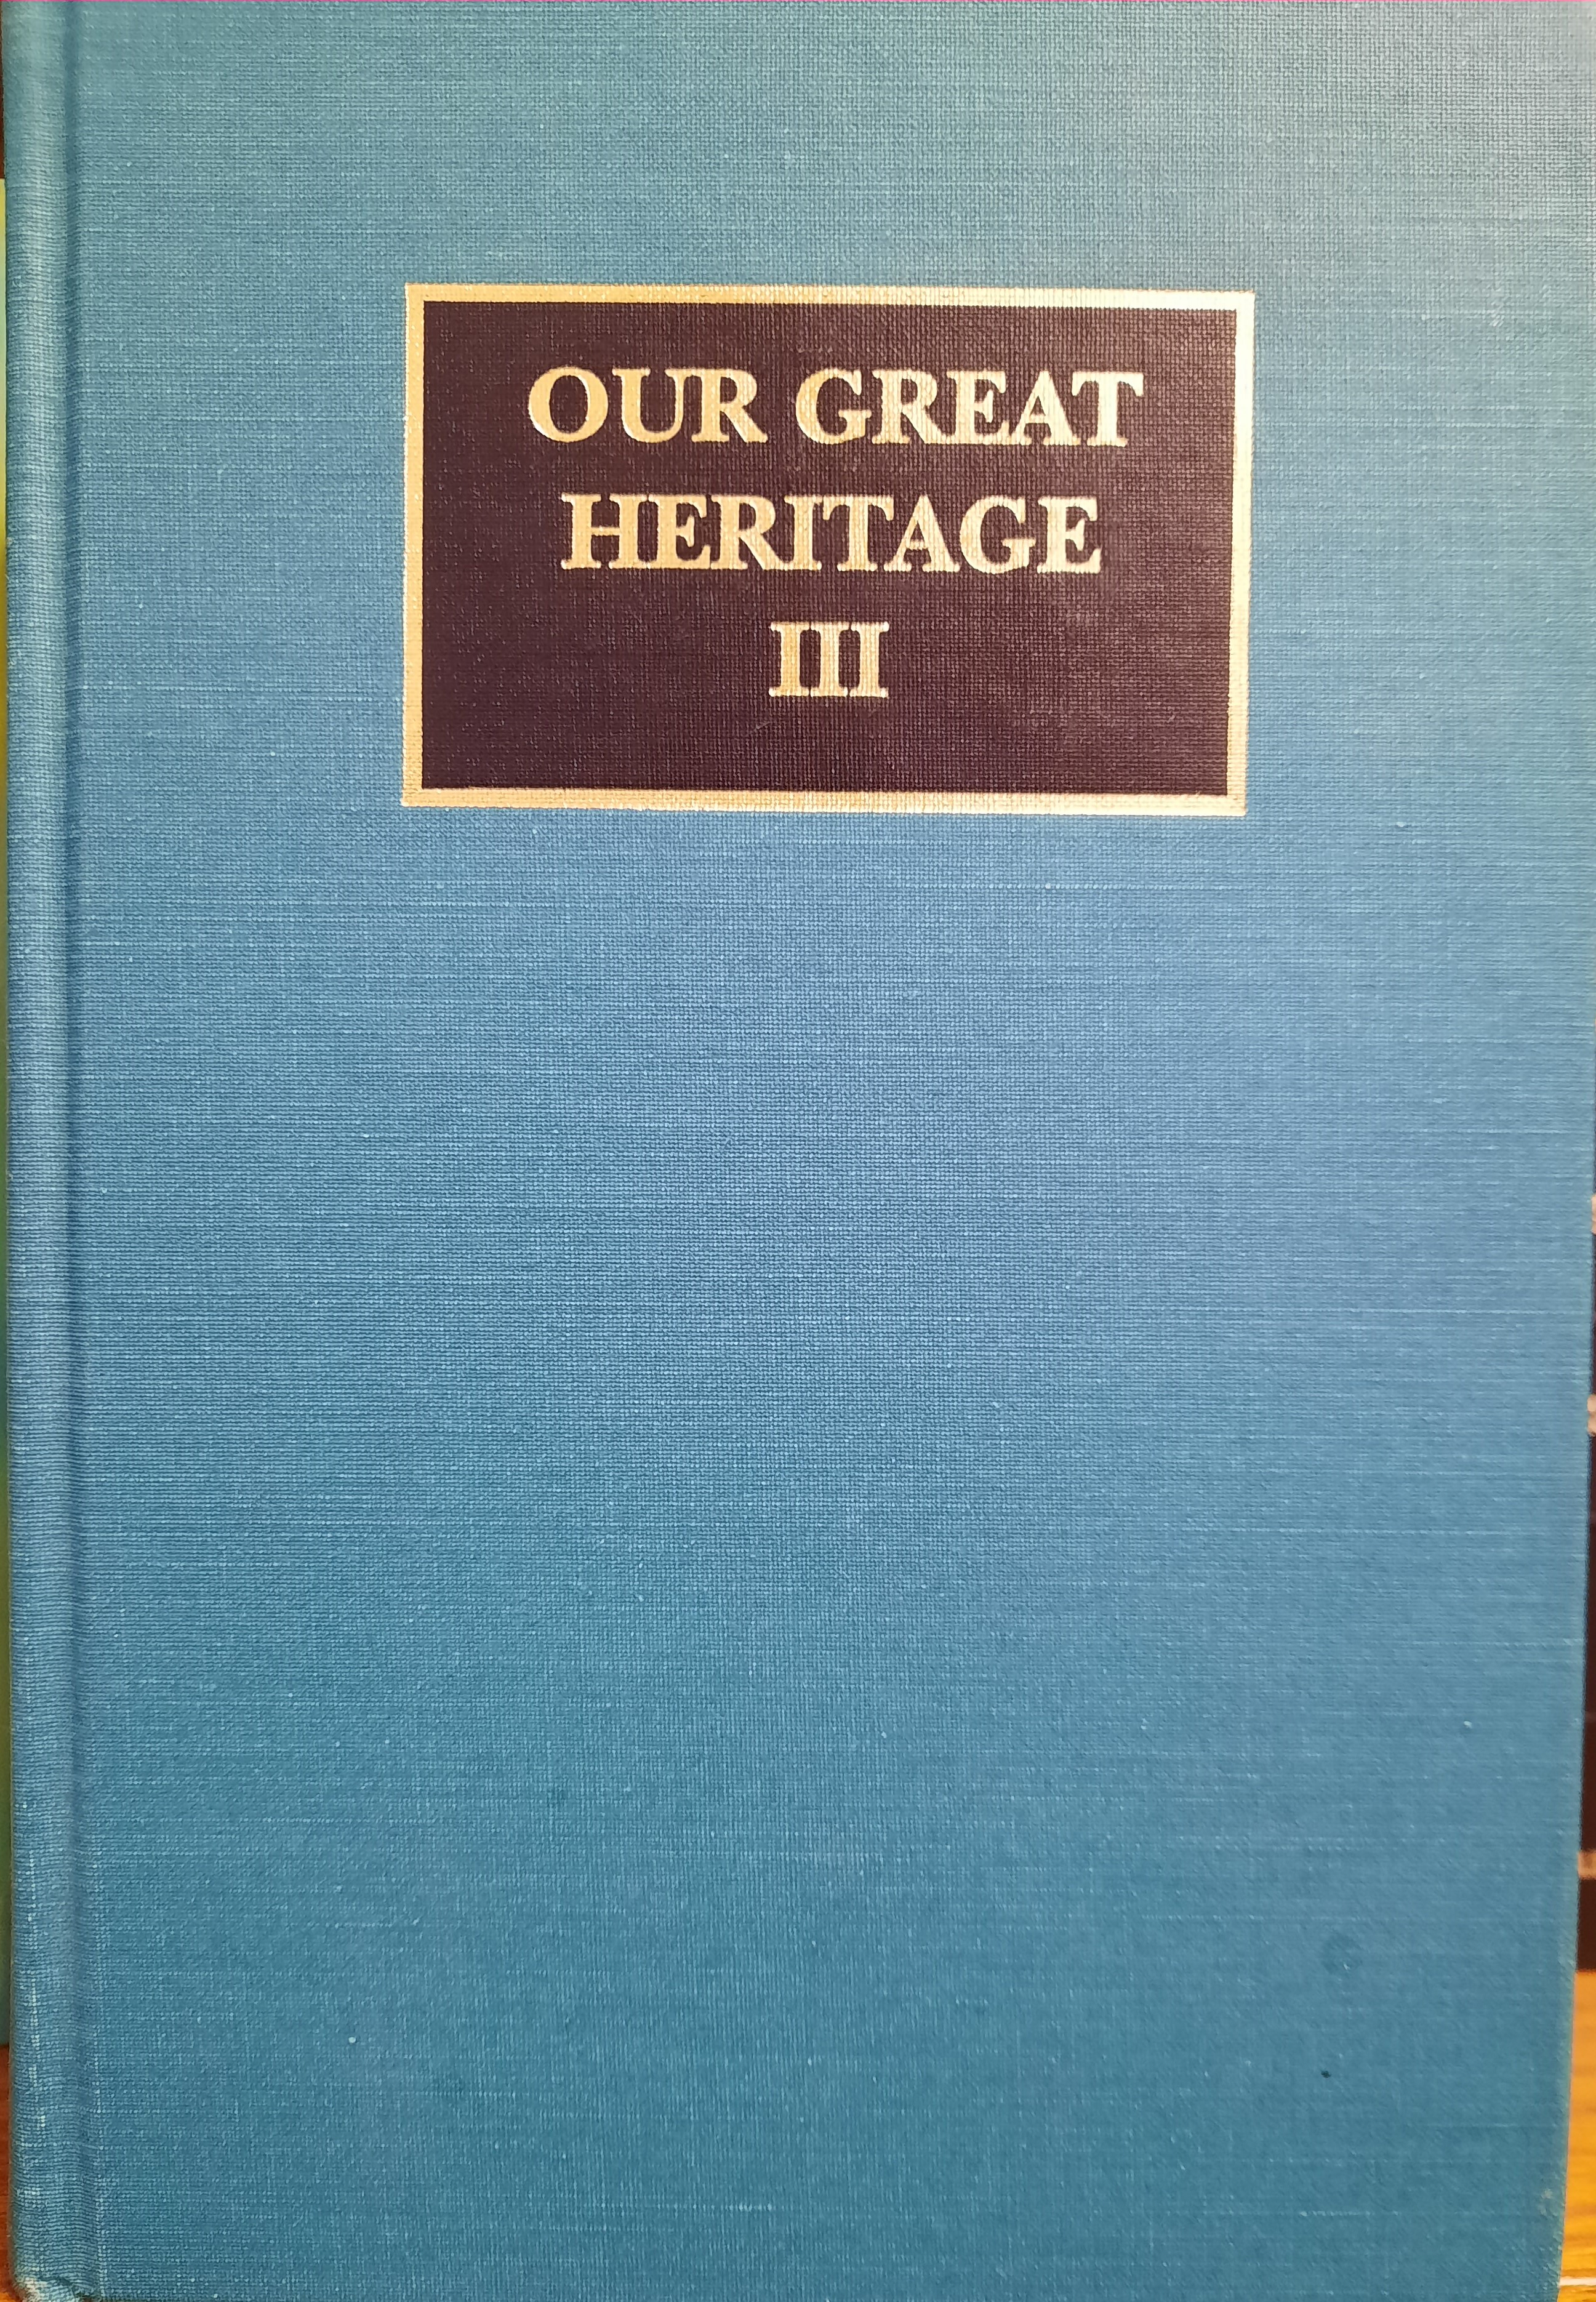 Our Great Heritage Vol. 3